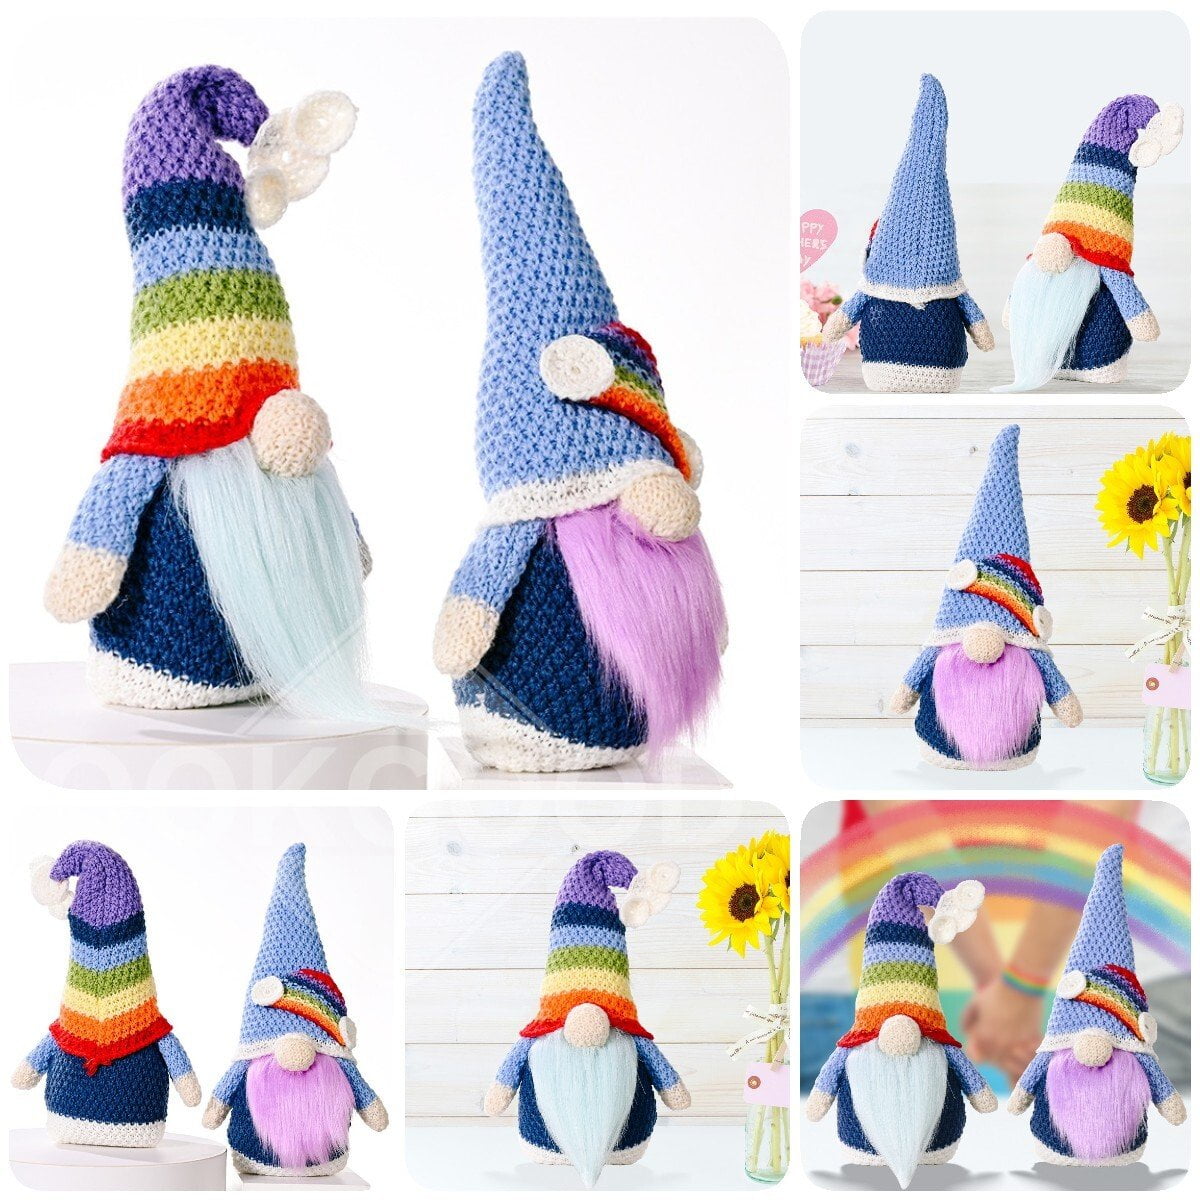 Hand-knitted Plush Rainbow Gnome For Holiday Gift And Decoration